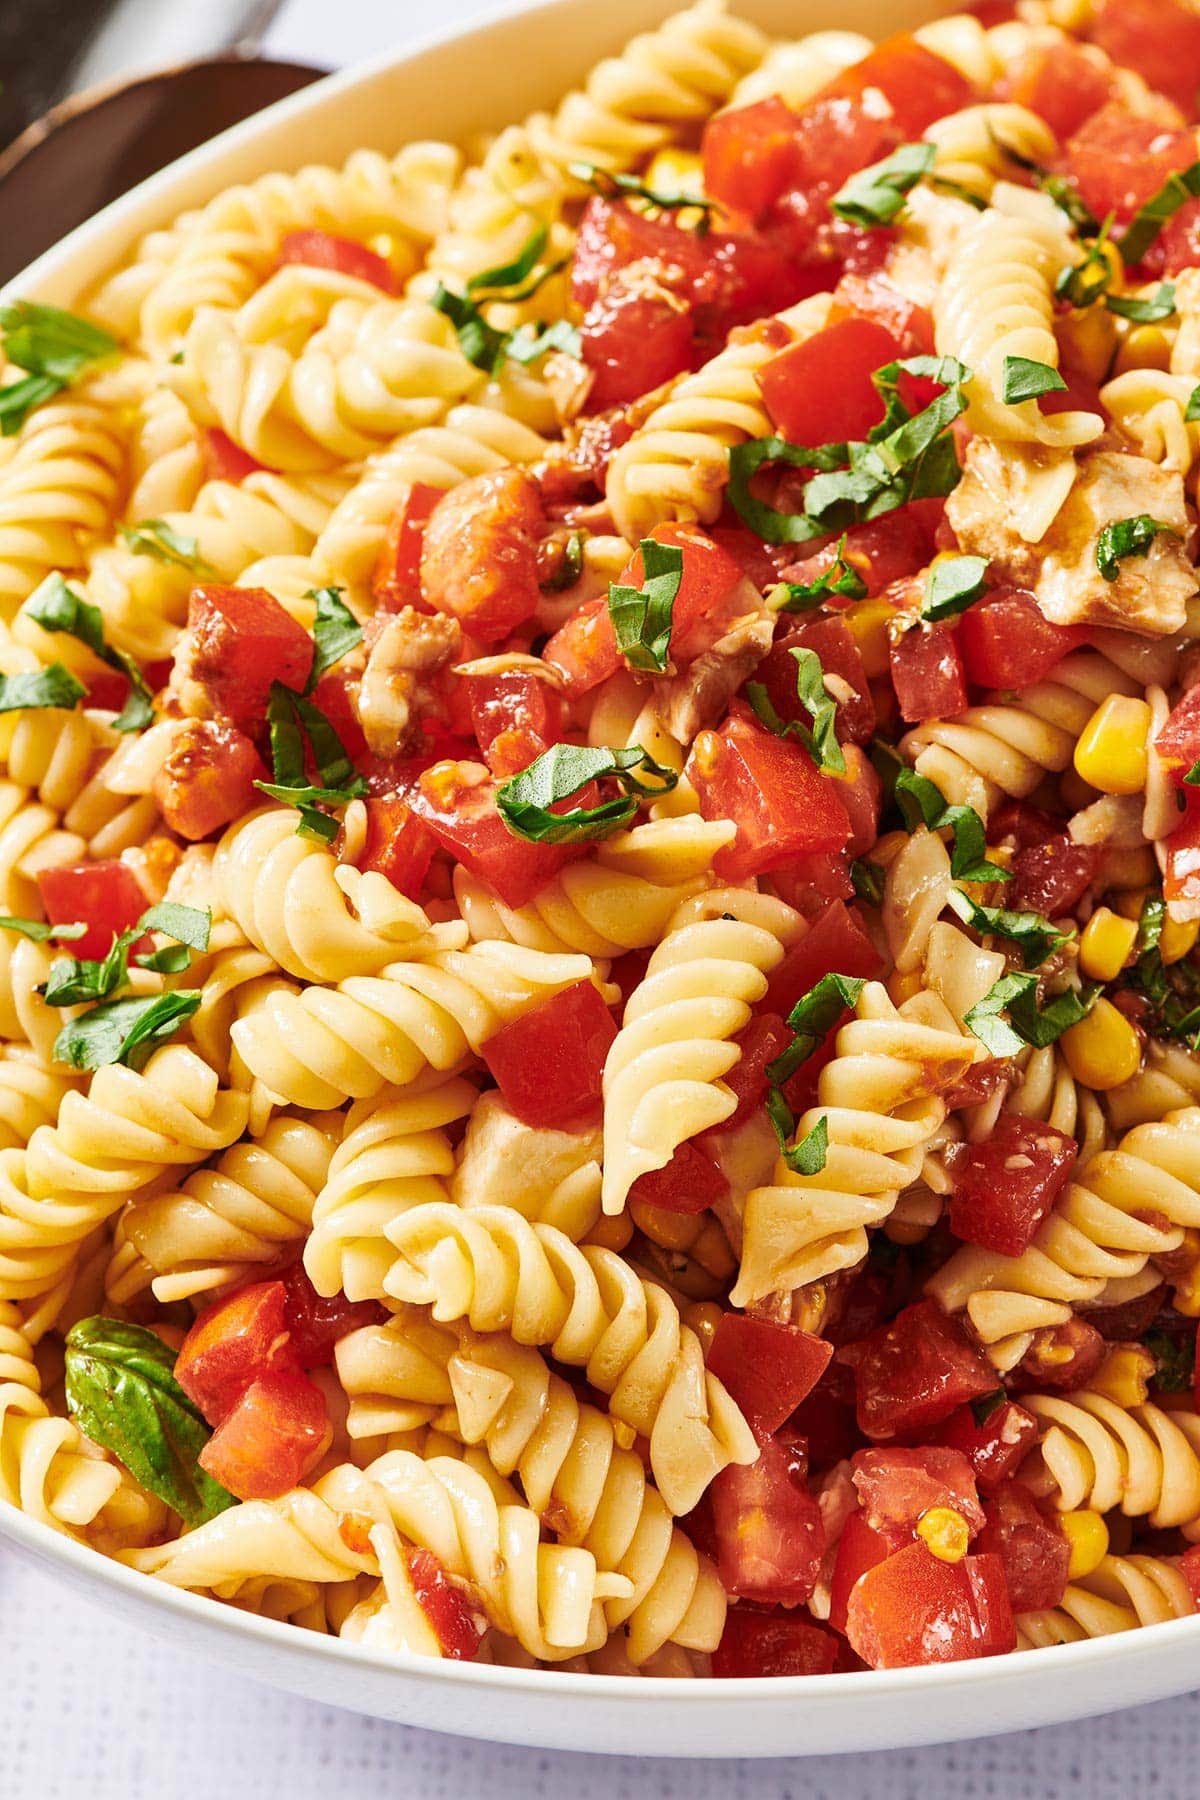 Pasta salad with fresh tomatoes, corn, and mozzarella in white serving dish.